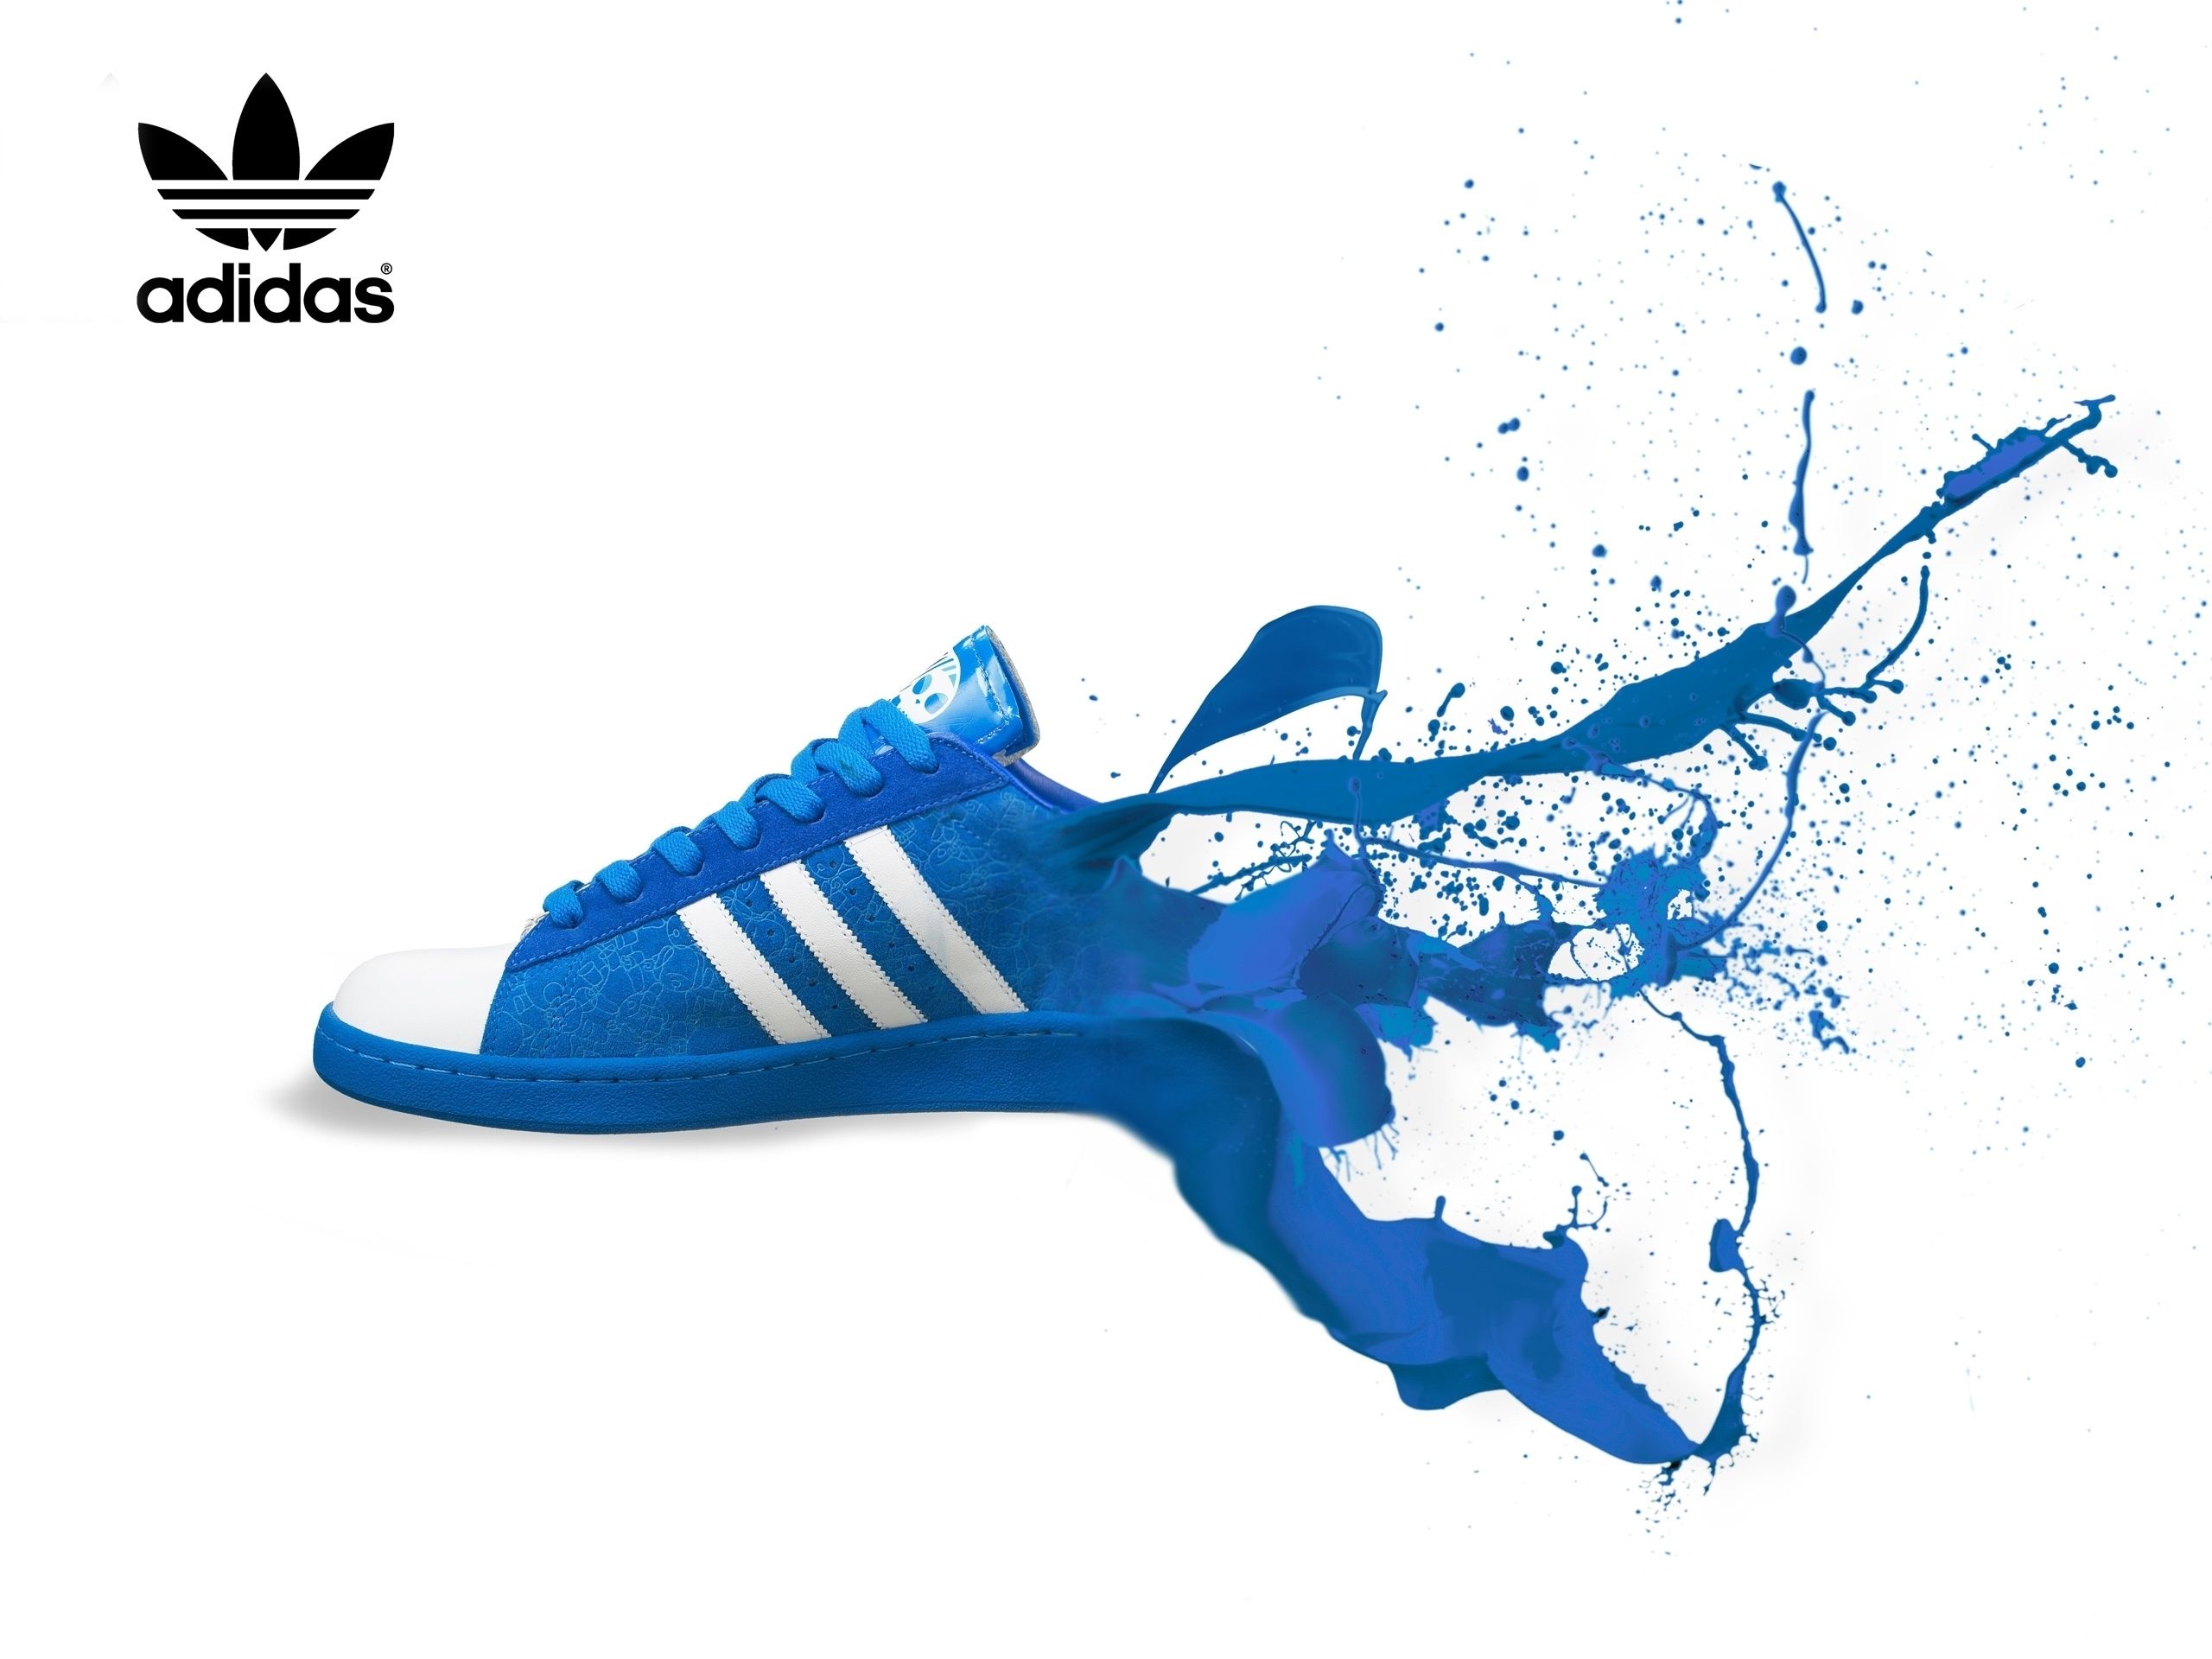 26 Adidas HD Wallpapers | Backgrounds - Wallpaper Abyss